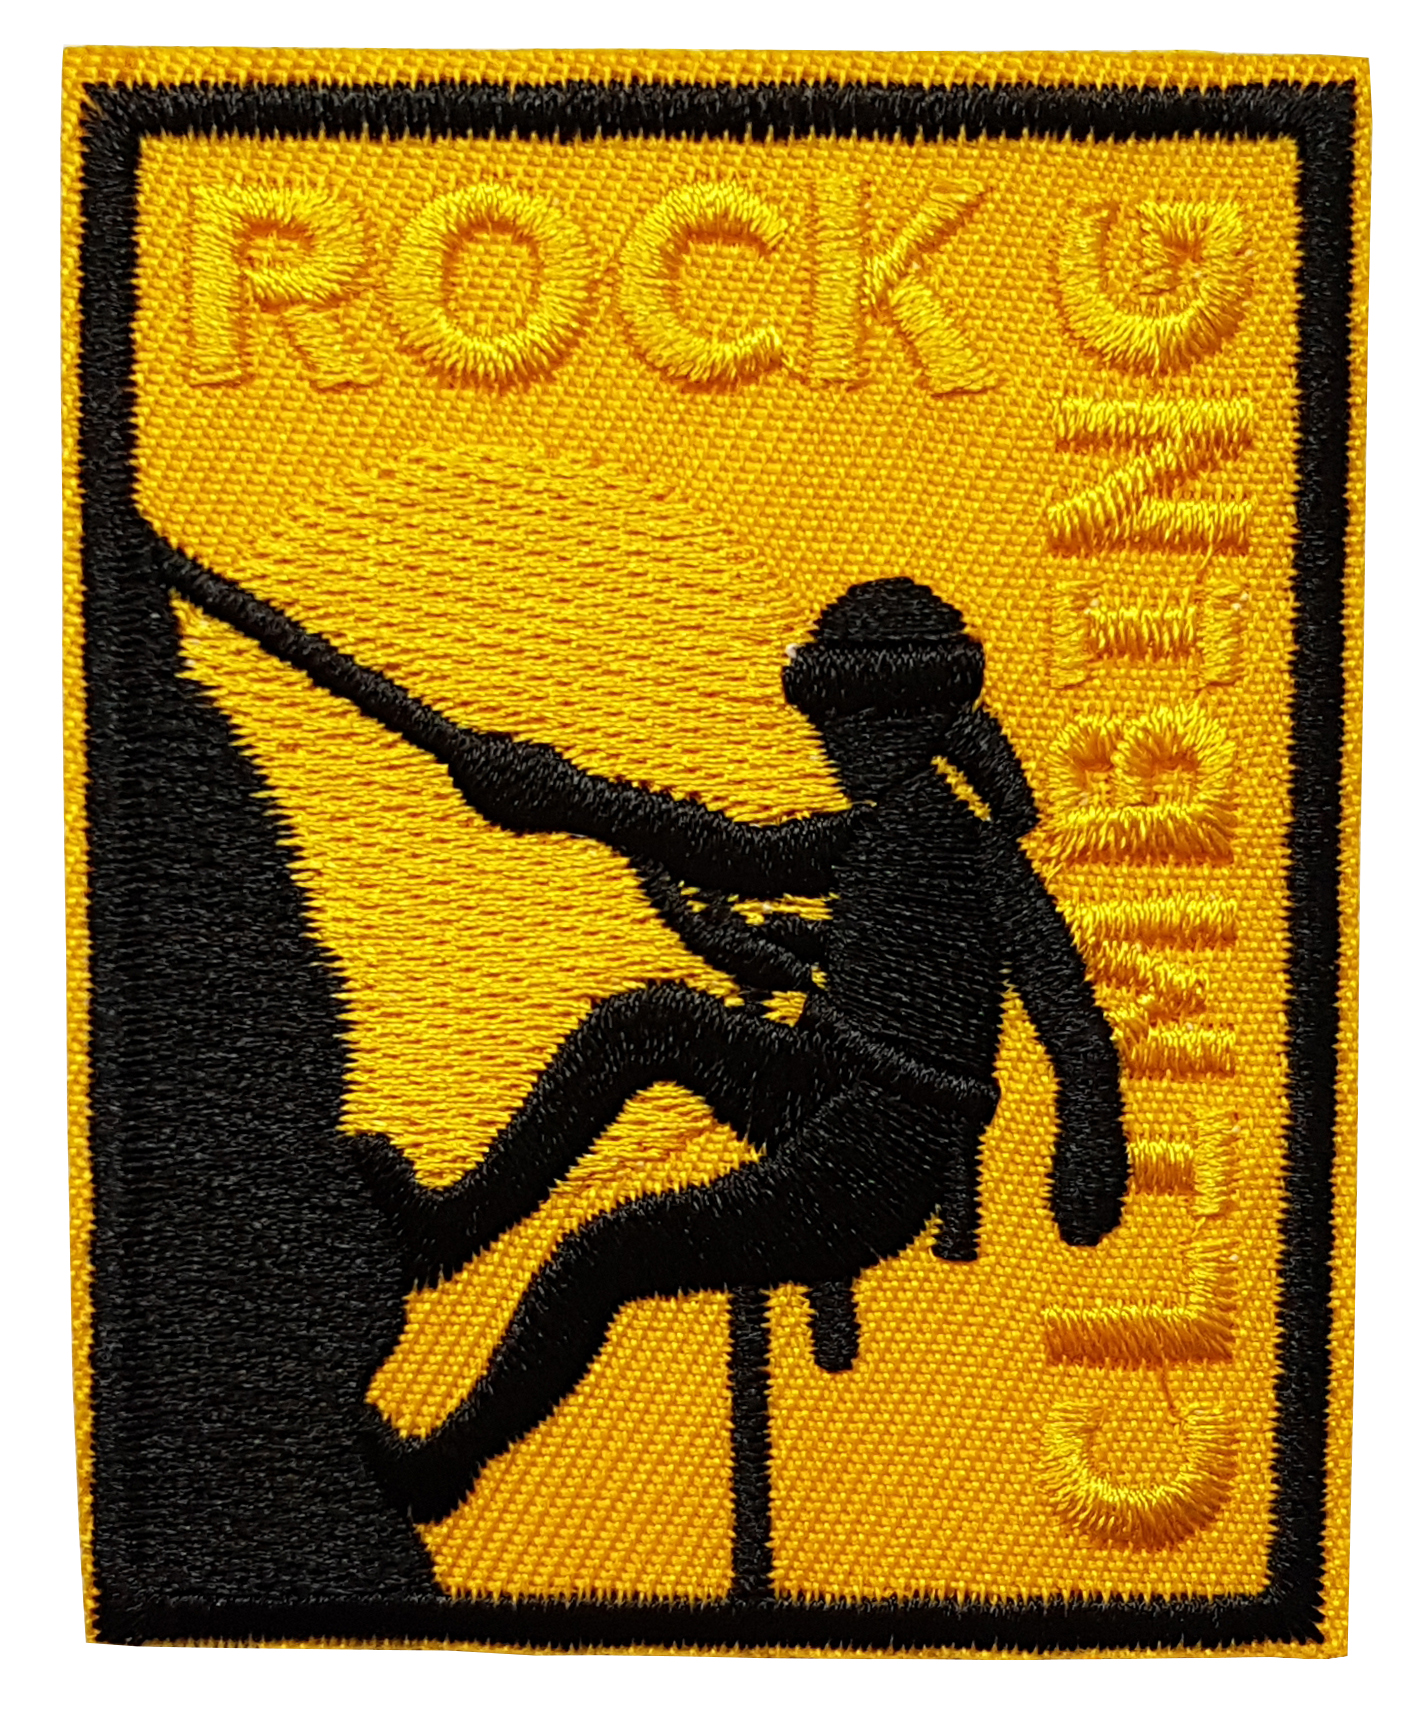 Patch Thermocollant Escalade 1